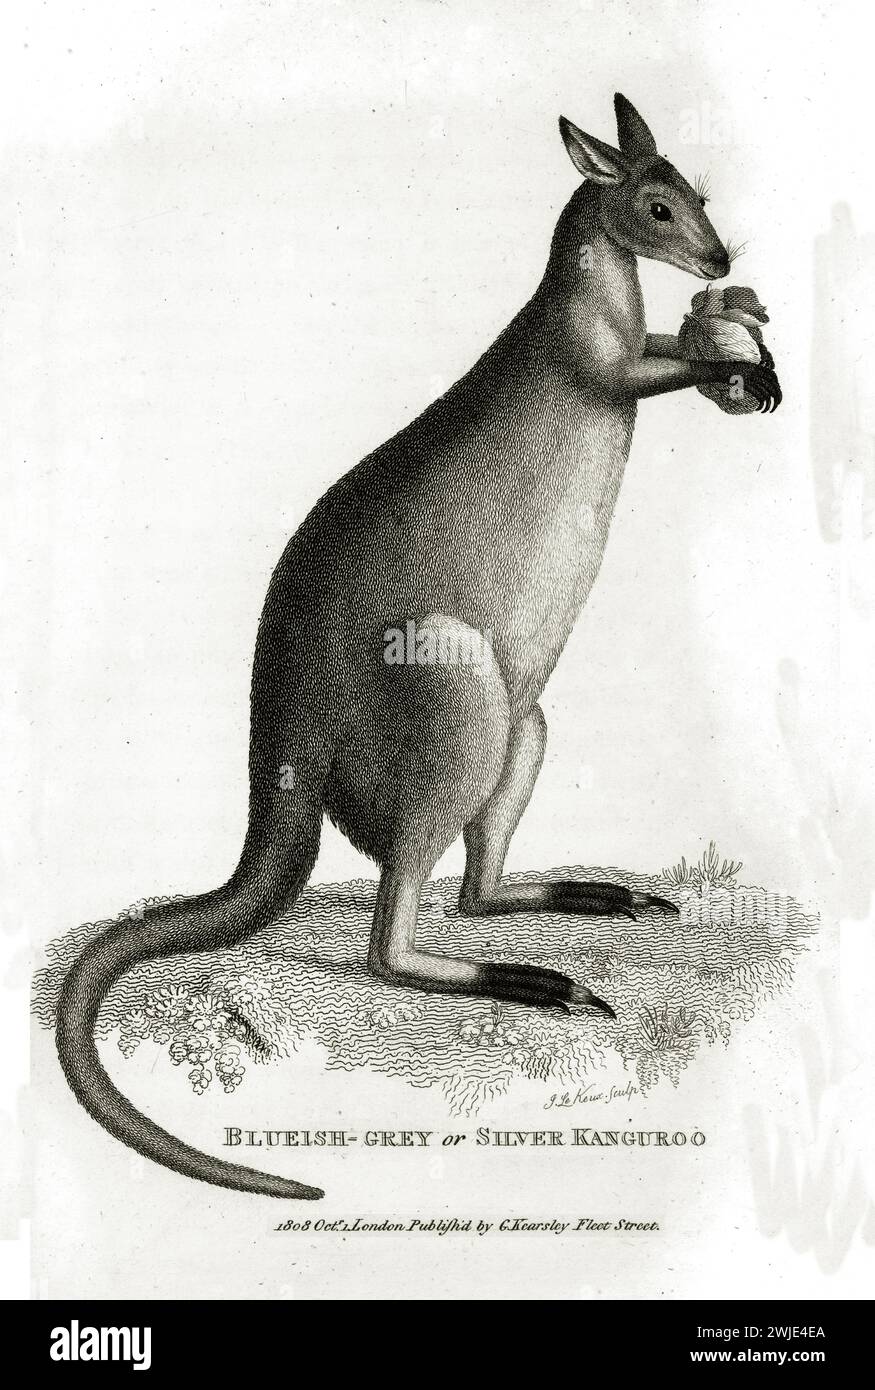 Old engraved illustration of Blueish-grey or Silver Kangaroo (Eastern Grey Kangaroo). Created by George Shaw, published in Zoological Lectures, London Stock Photo